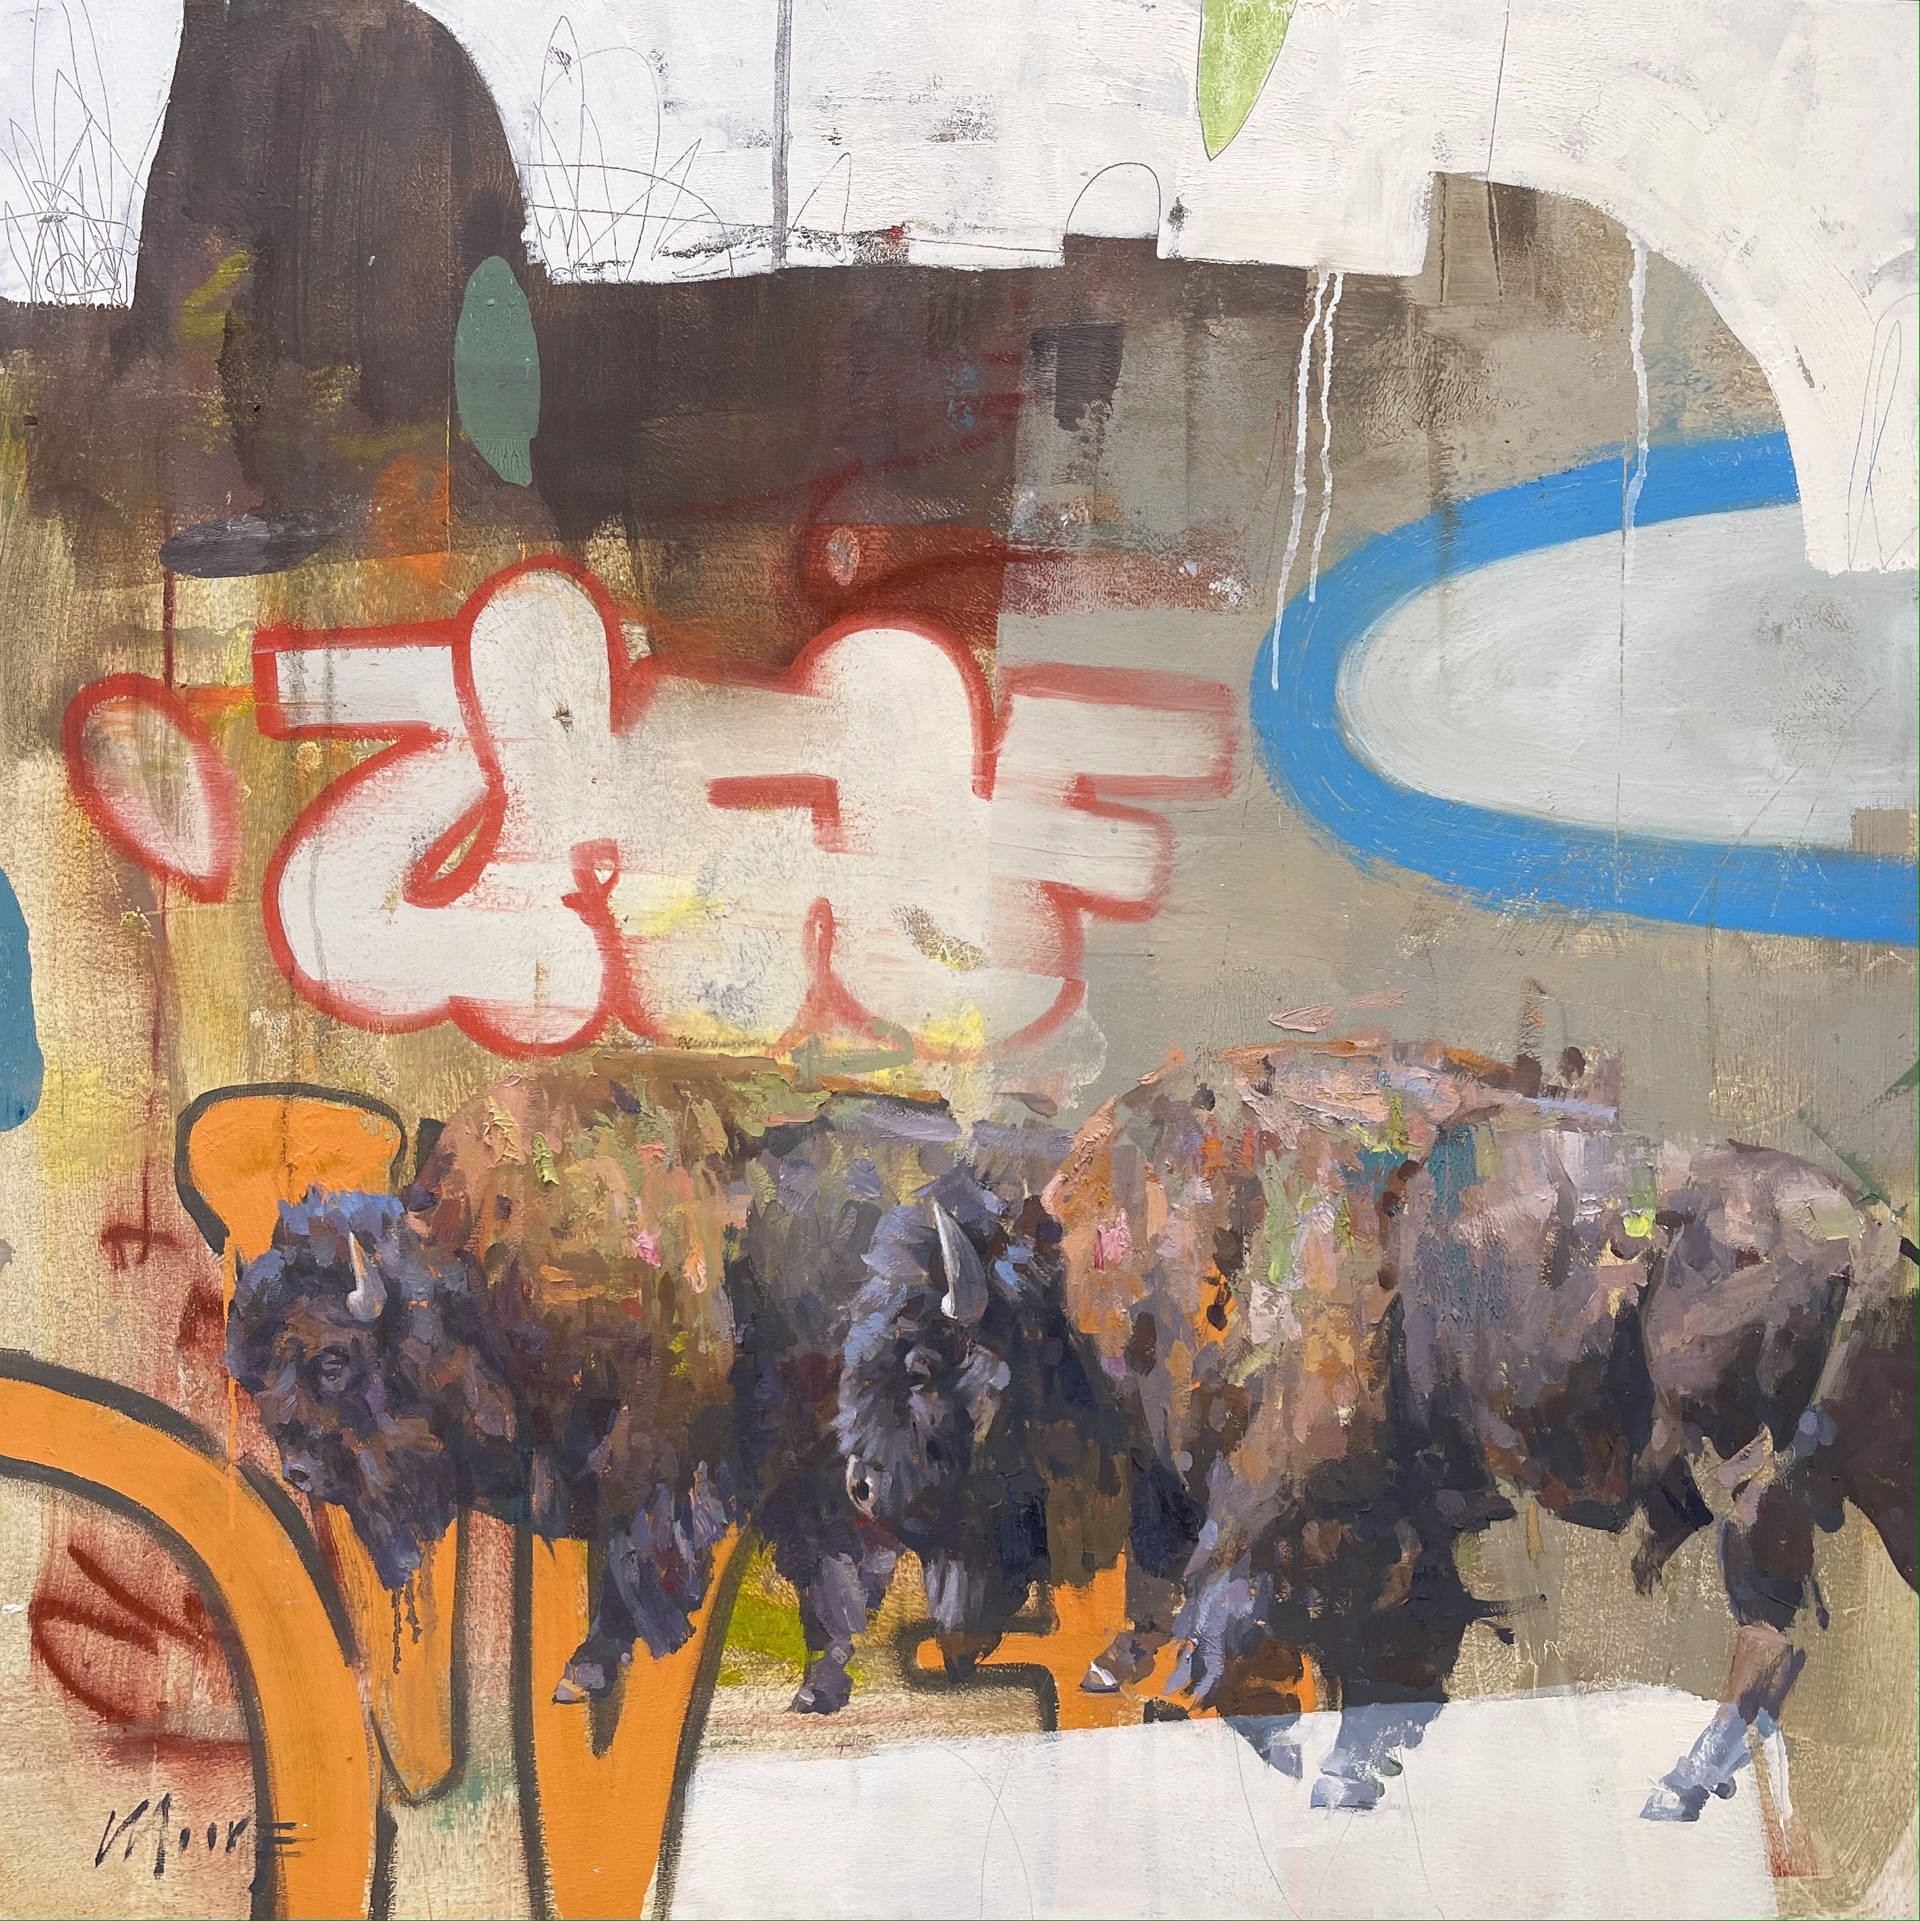 An Oil Painting Of Two Bison Waling With An Abstract Graffiti Style Background, By Larry Moore